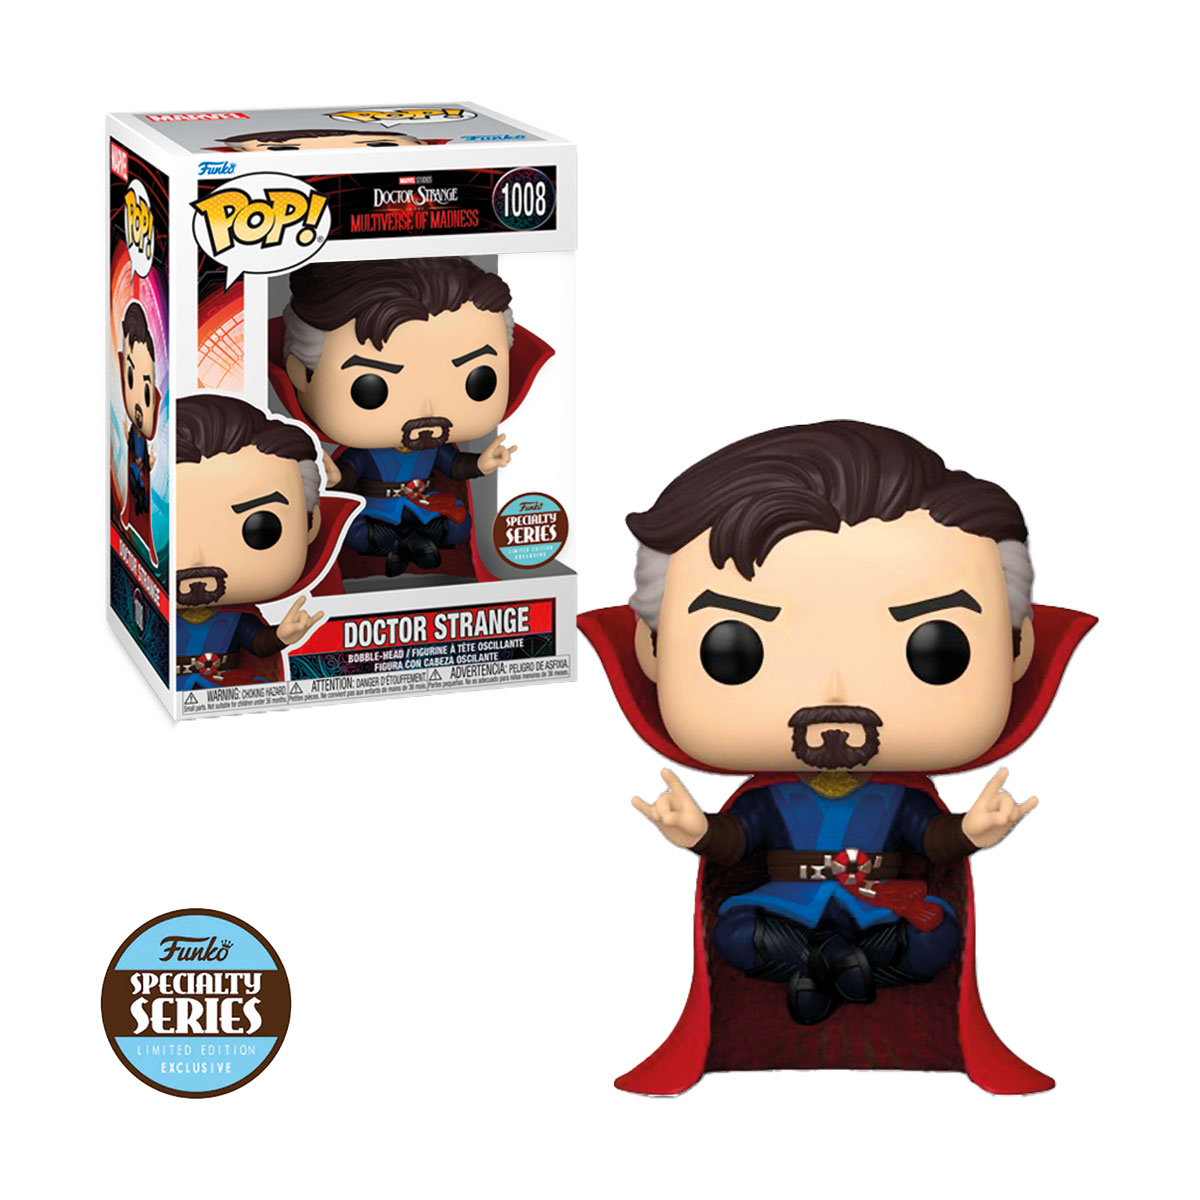 Funko Pop Doctor Strange In The Multiverse Of Madness Doctor Strange 1008 Exclusive